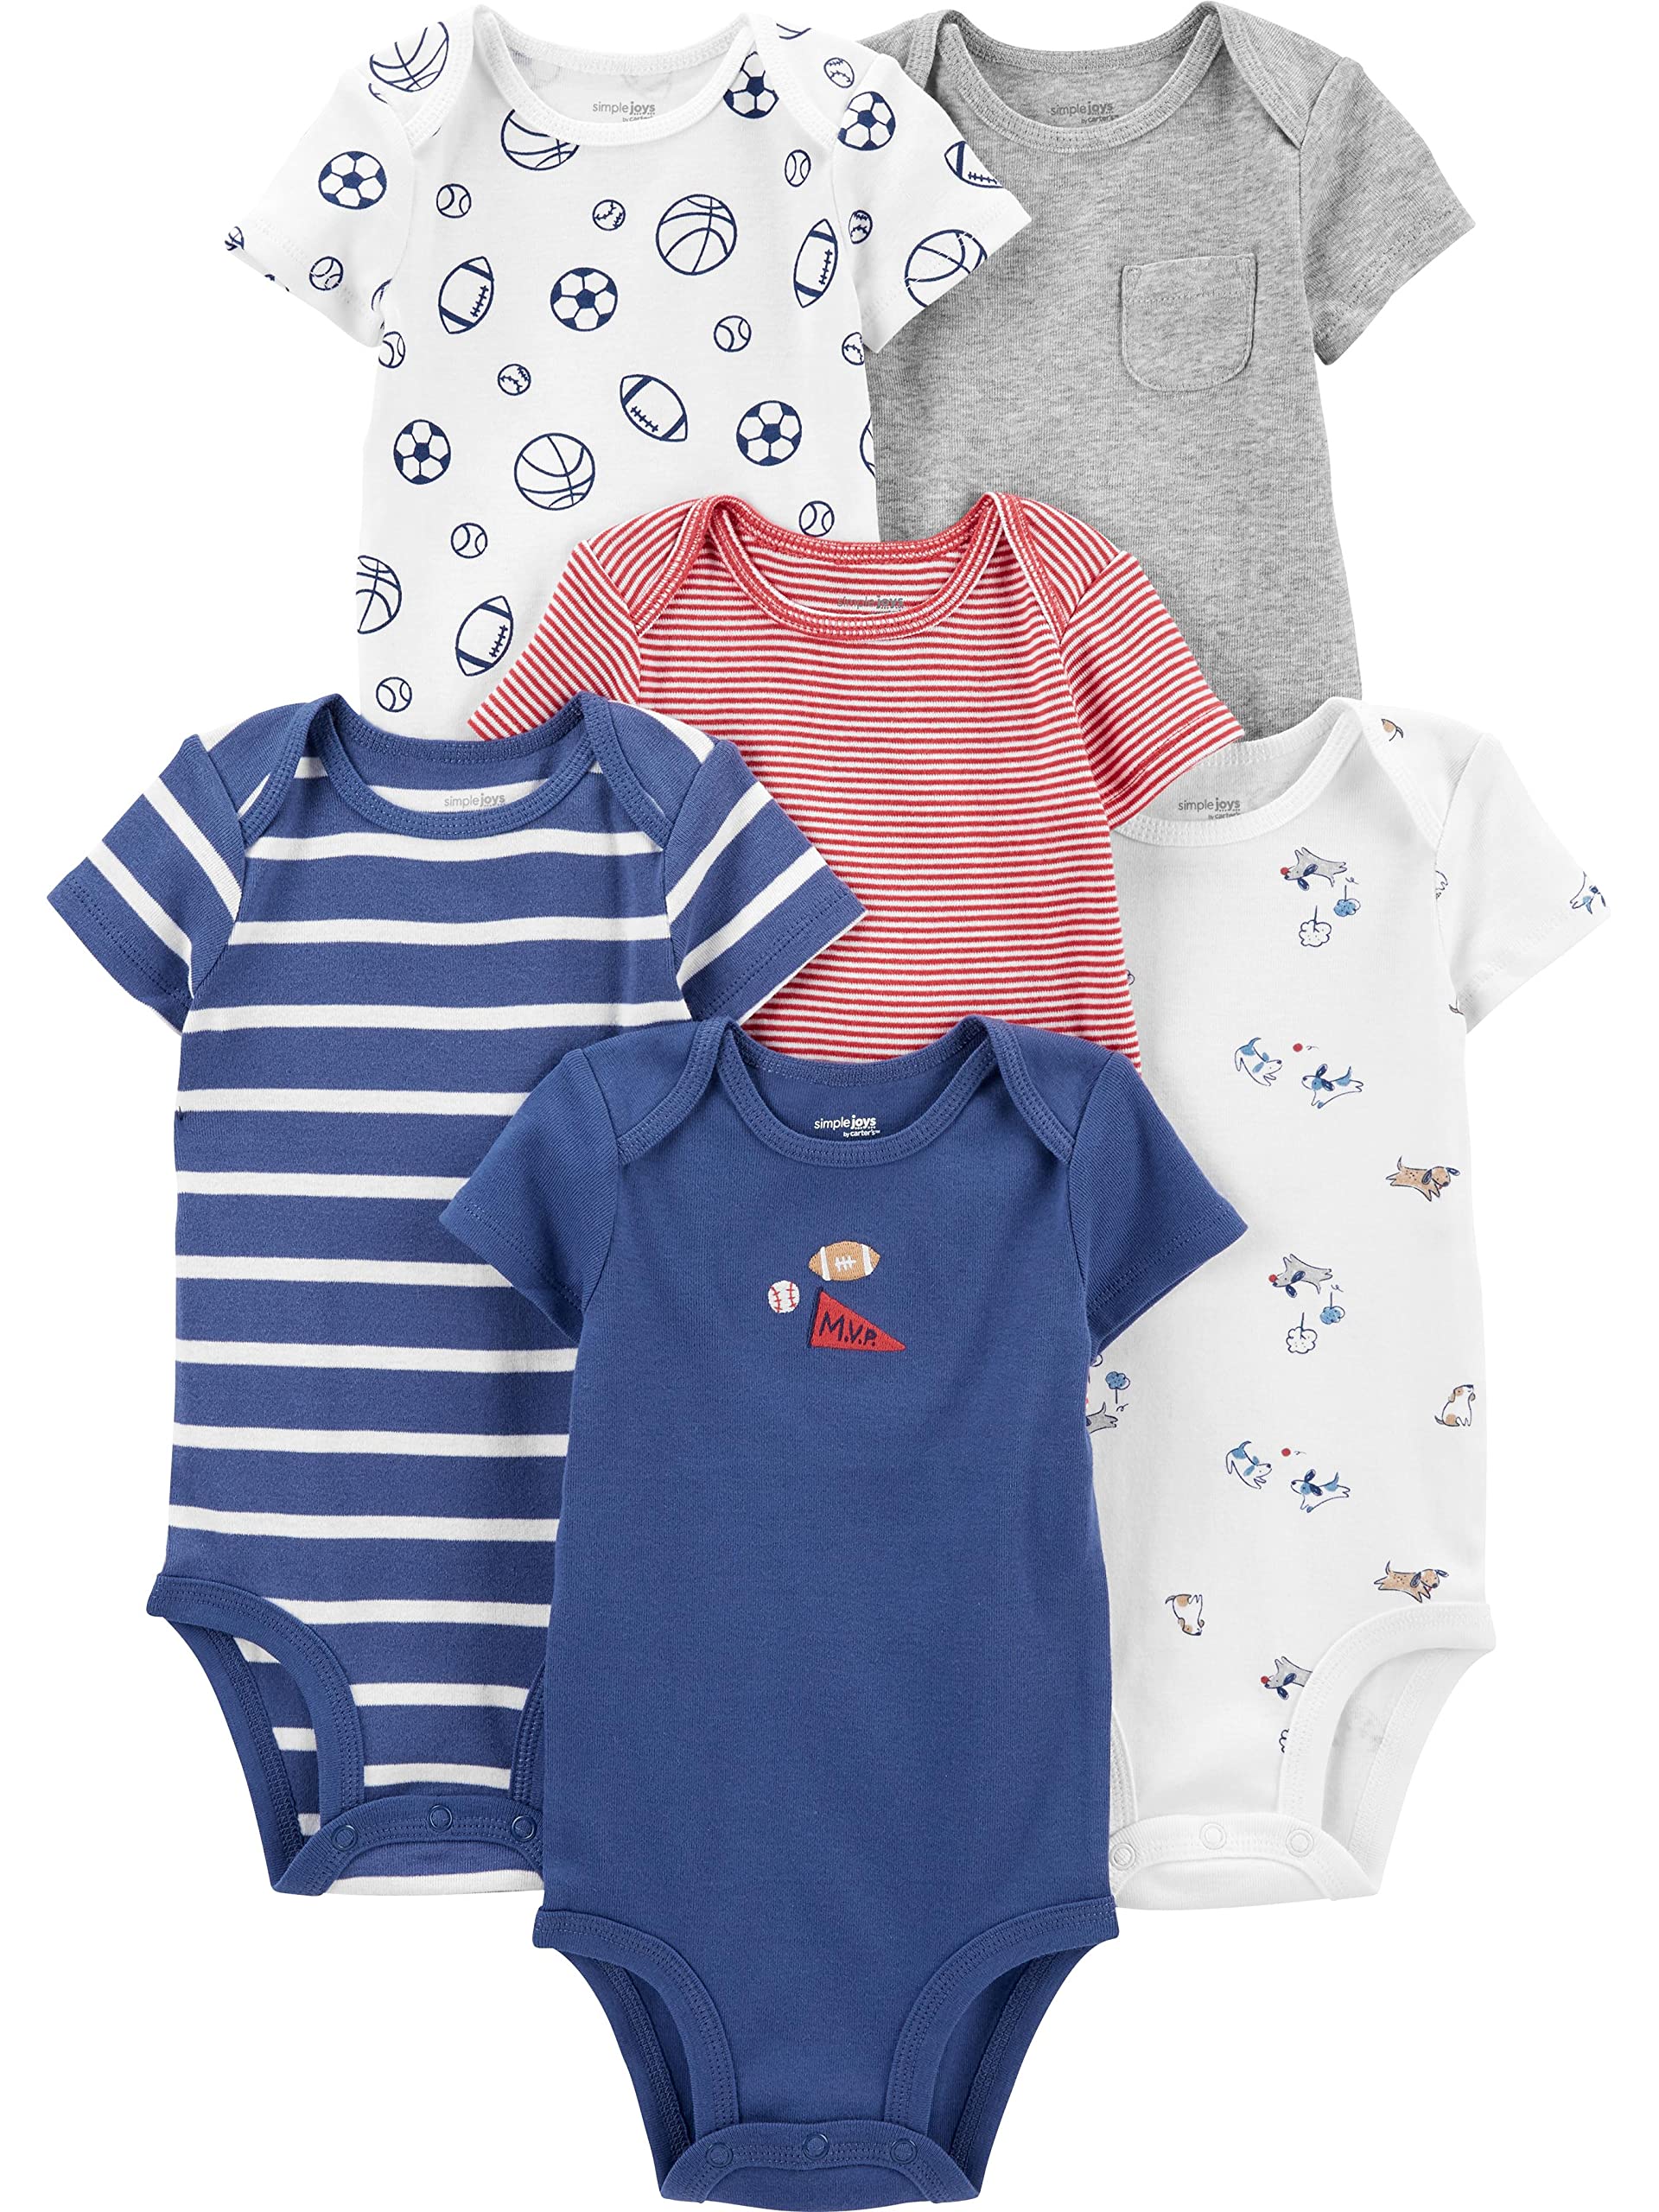 Simple Joys by Carter's Baby Boys' Short-Sleeve Bodysuit, Pack of 6, Multicolor/Dogs/Mini Stripe/Sports Pack, 12 Months